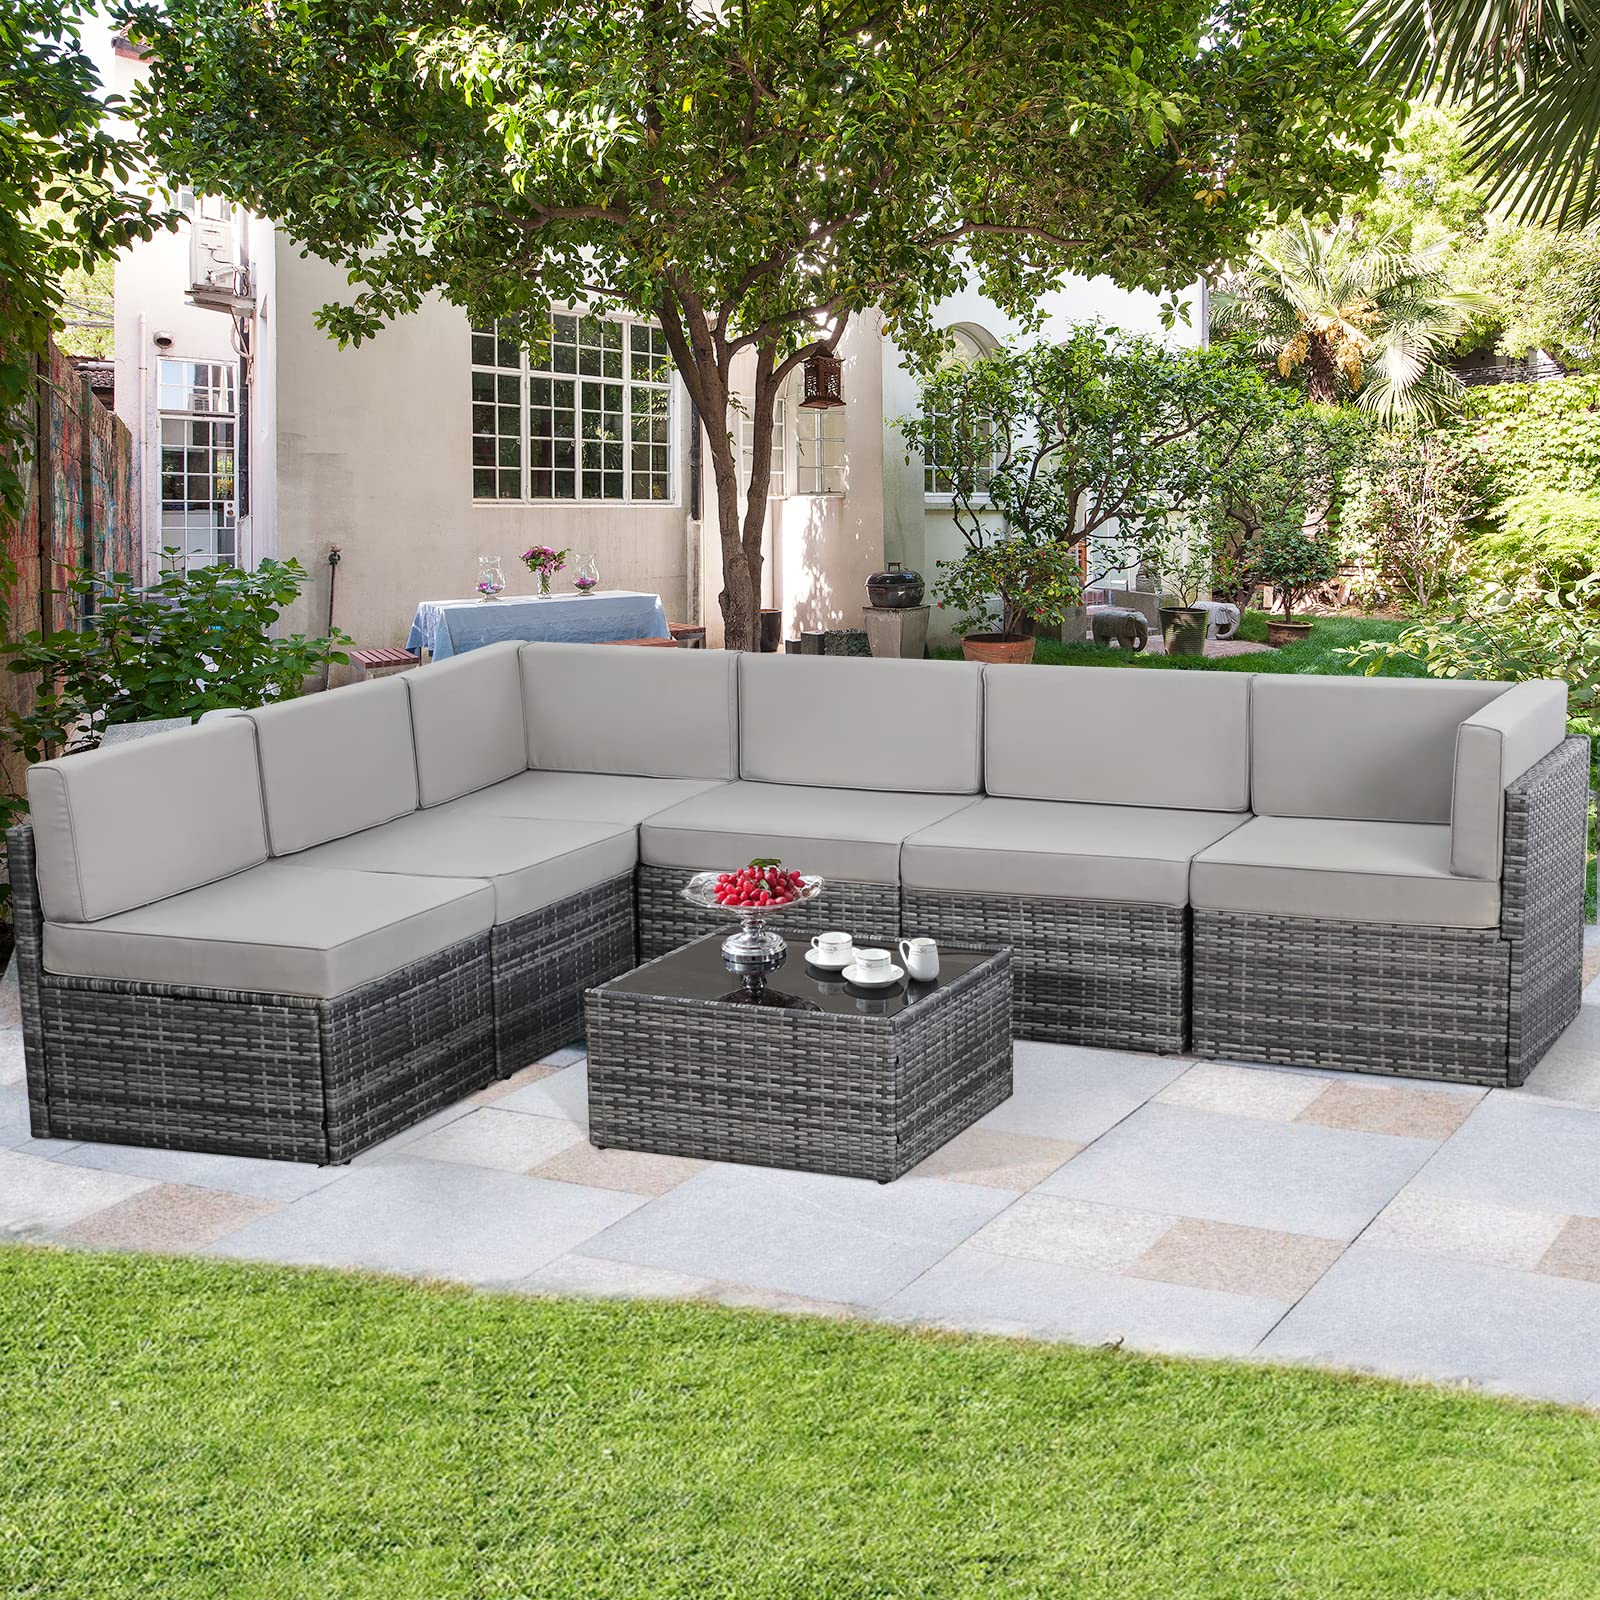 

7 Piece Outdoor Patio Furniture Set, Outdoor Sectional Conversation Furniture Chair With Coffee Table,patio Sectional For Garden,backyard(grey Cushions And Grey Pe Rattan)